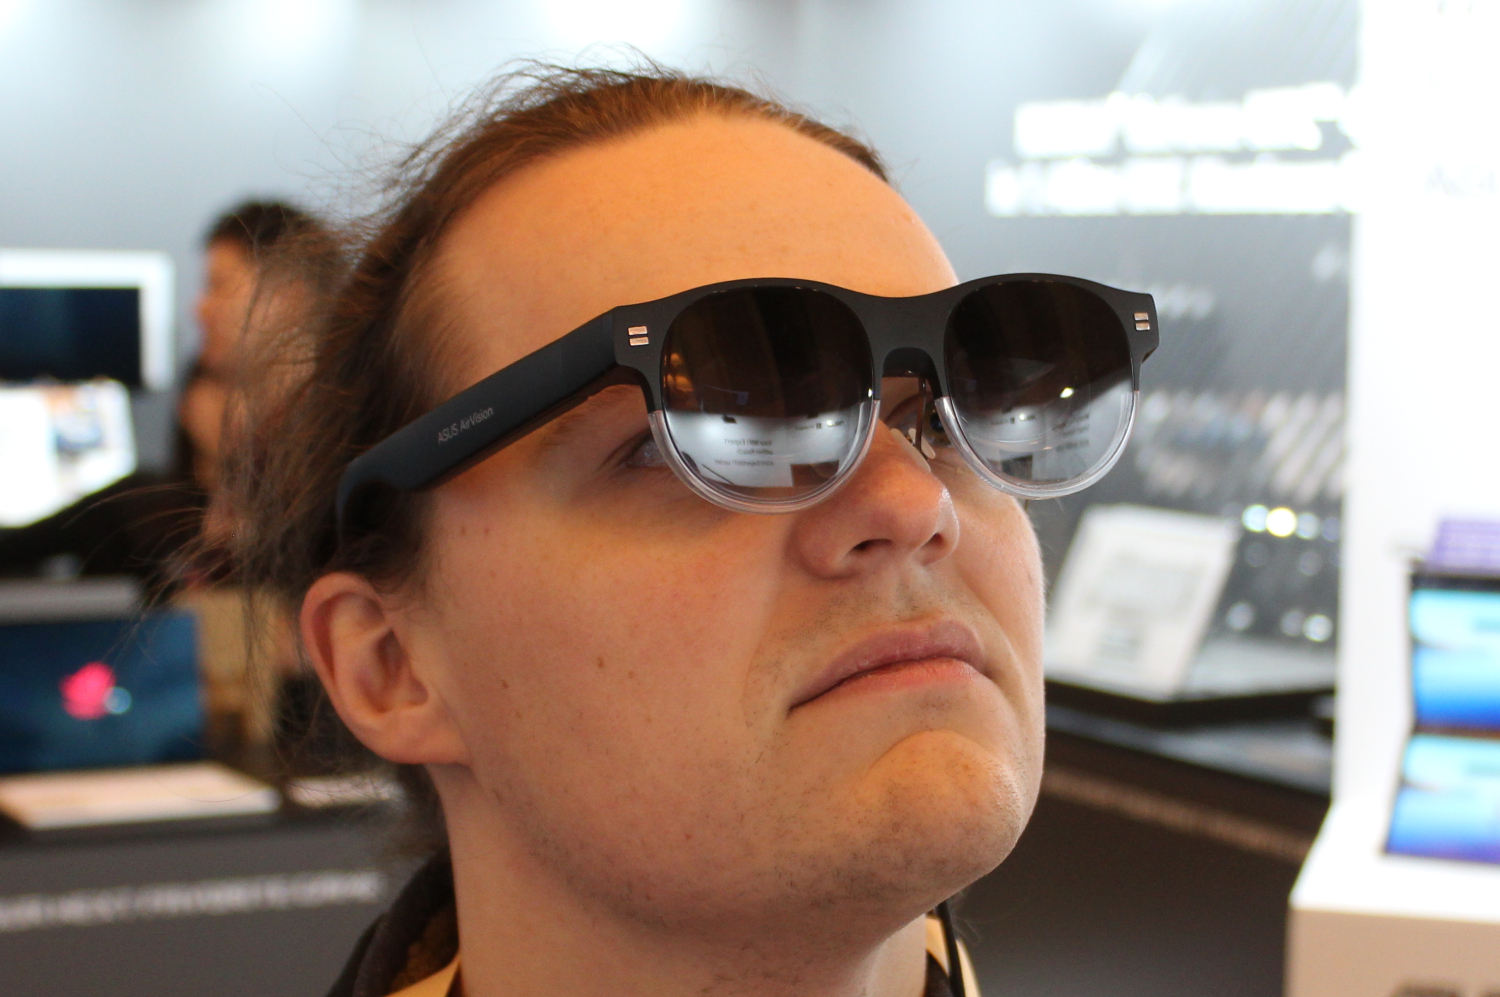 CES wasn't ready for the Vision Pro